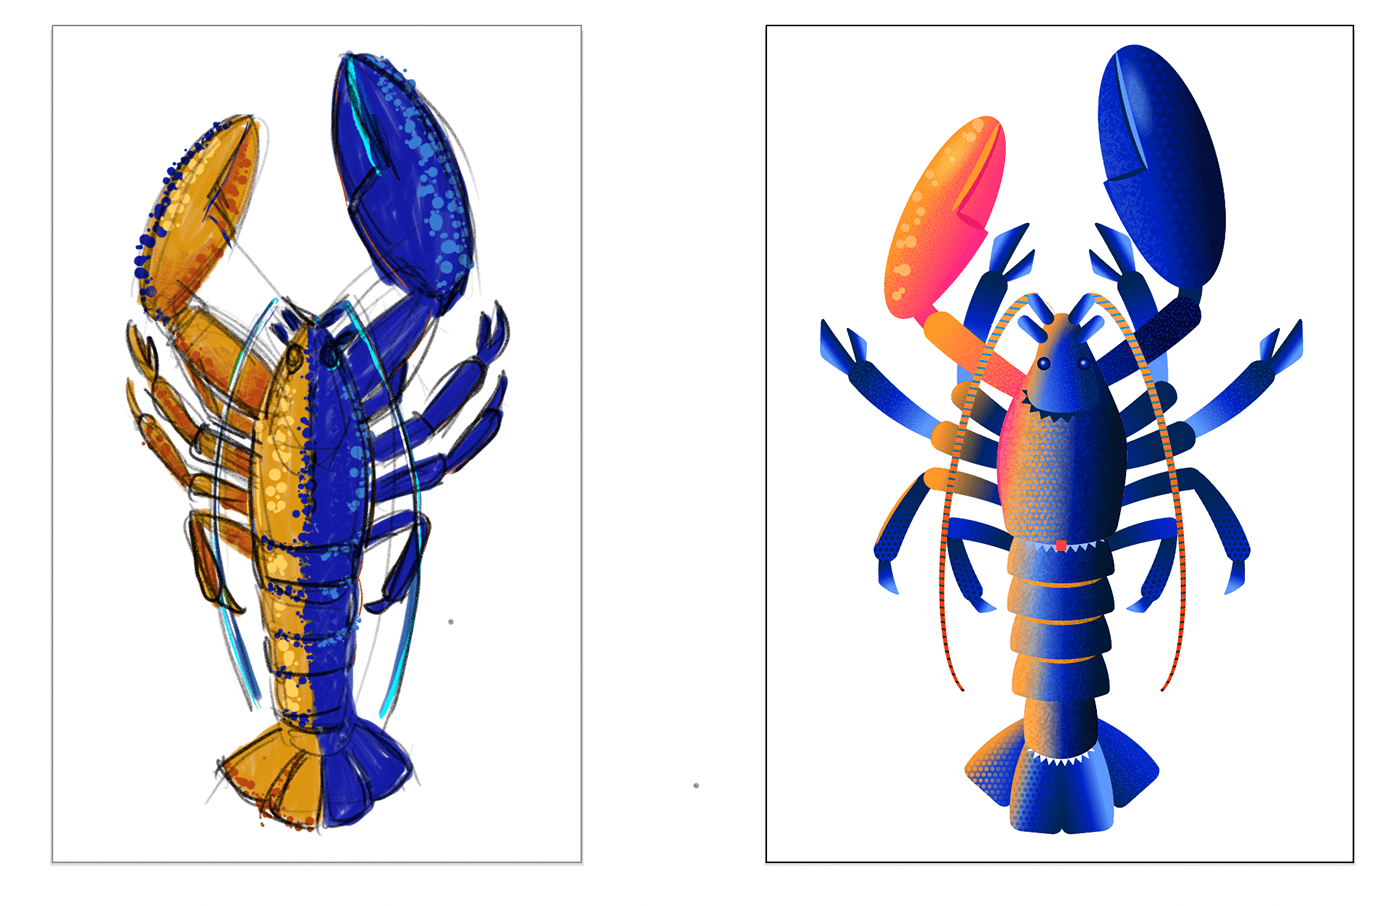 appearance blueanimalchallenge effects lobster Nature one anchor point vector organic texture